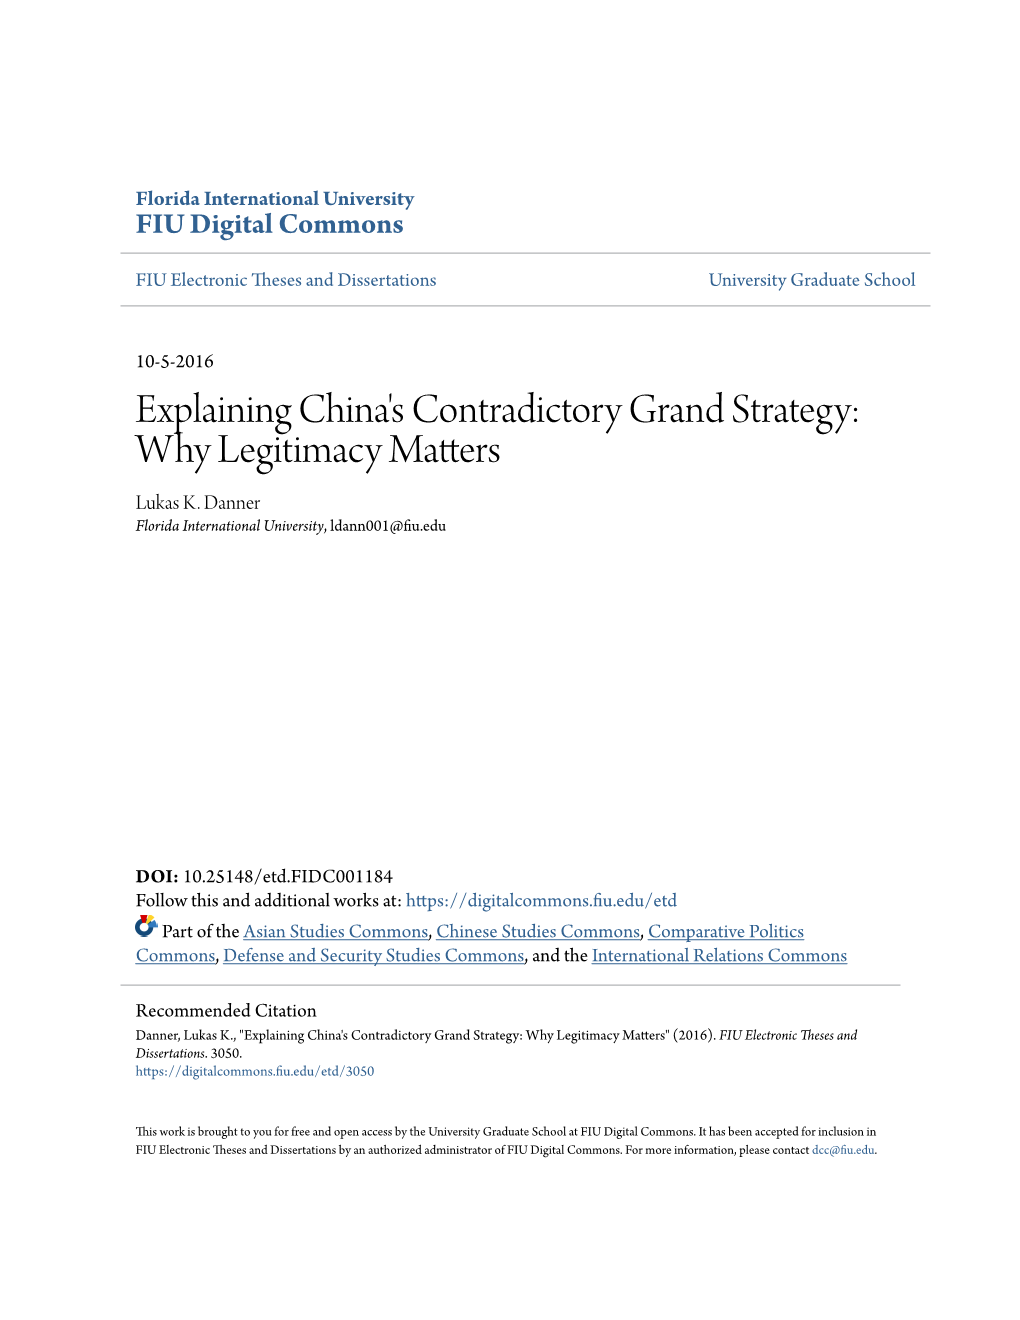 Explaining China's Contradictory Grand Strategy: Why Legitimacy Matters Lukas K